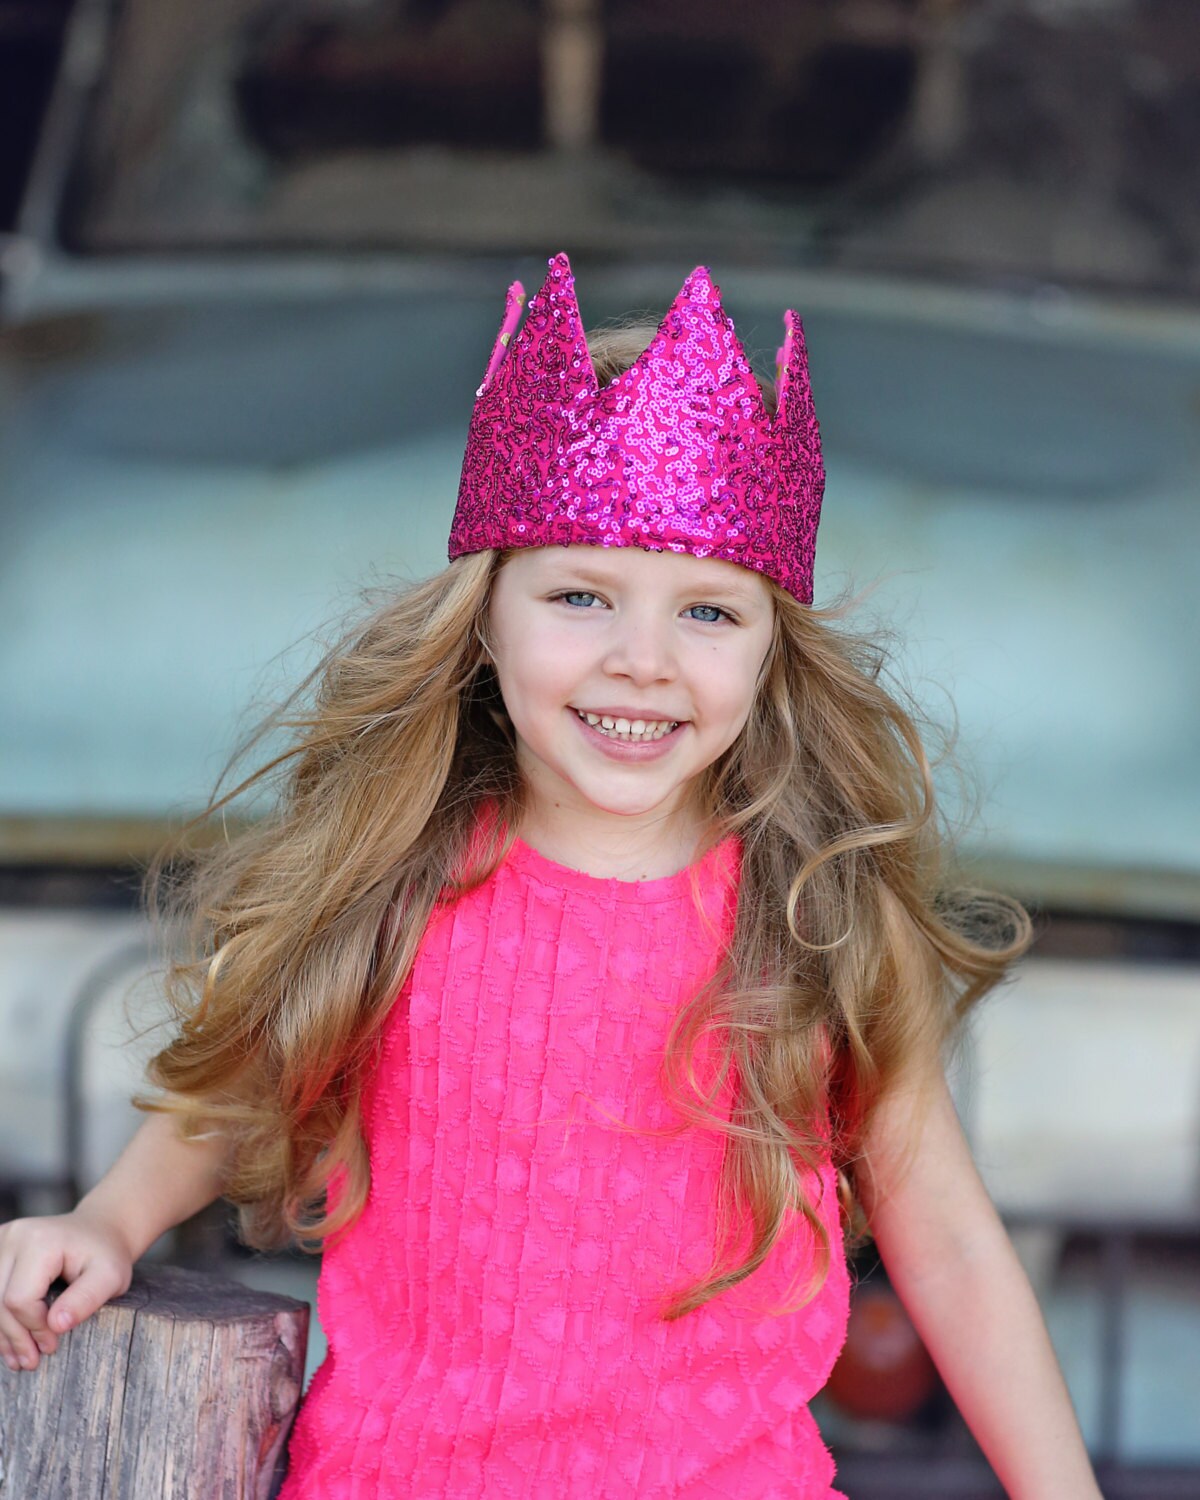 Dress Up Crown - Sequin Crown - Birthday Crown - Hot Pink with Gold Dots Crown Reverse Hot Pink Sequins - Fits all